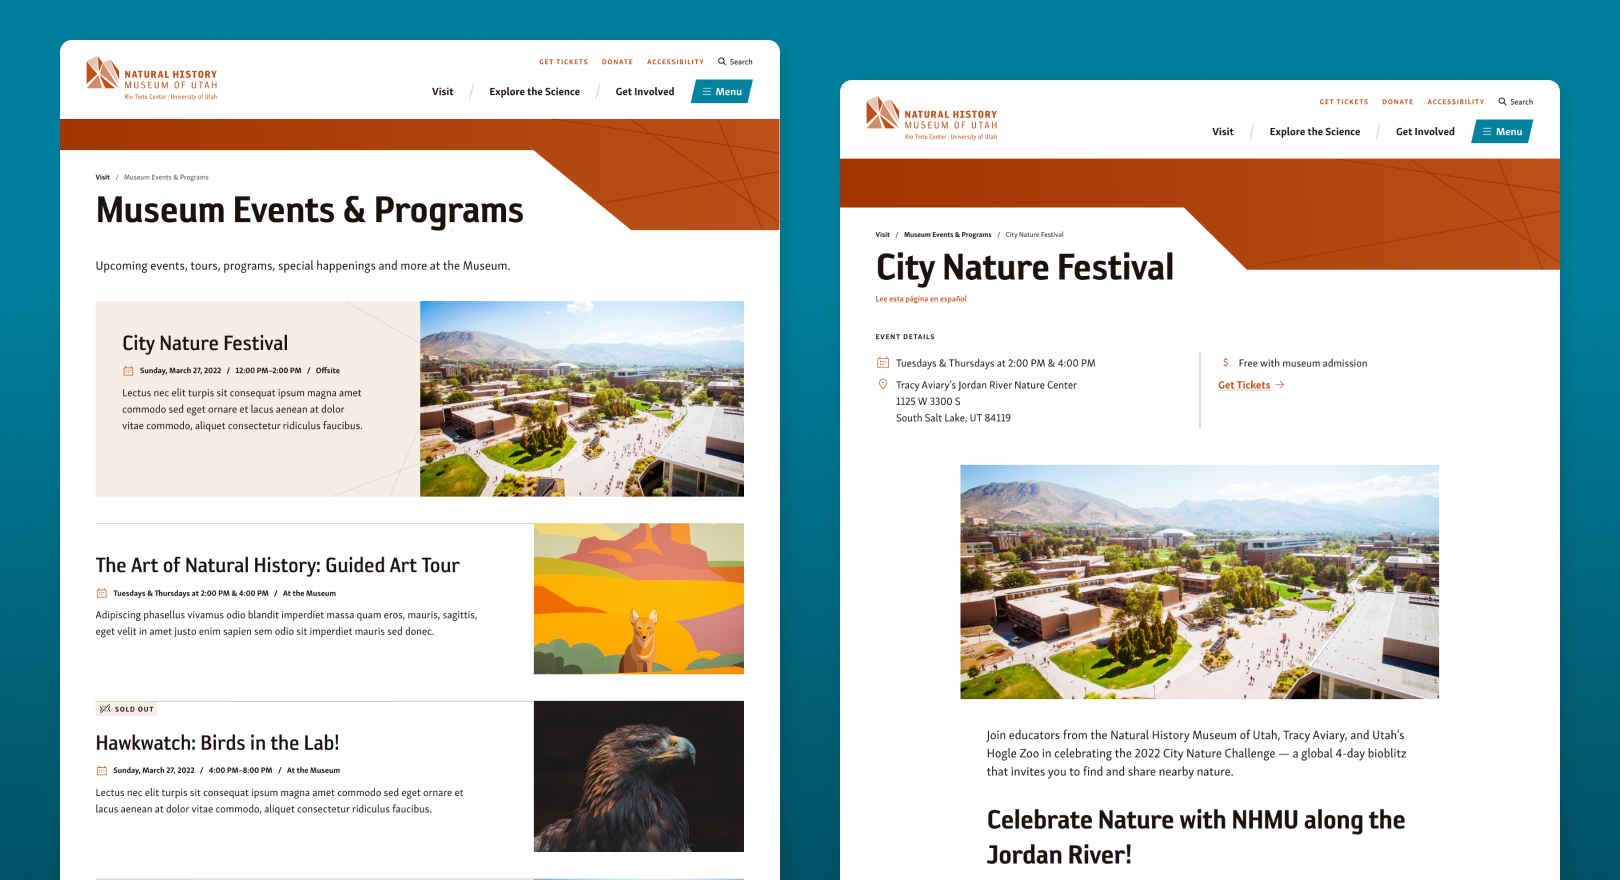 Museum Events & Programs and City Nature Festival web pages